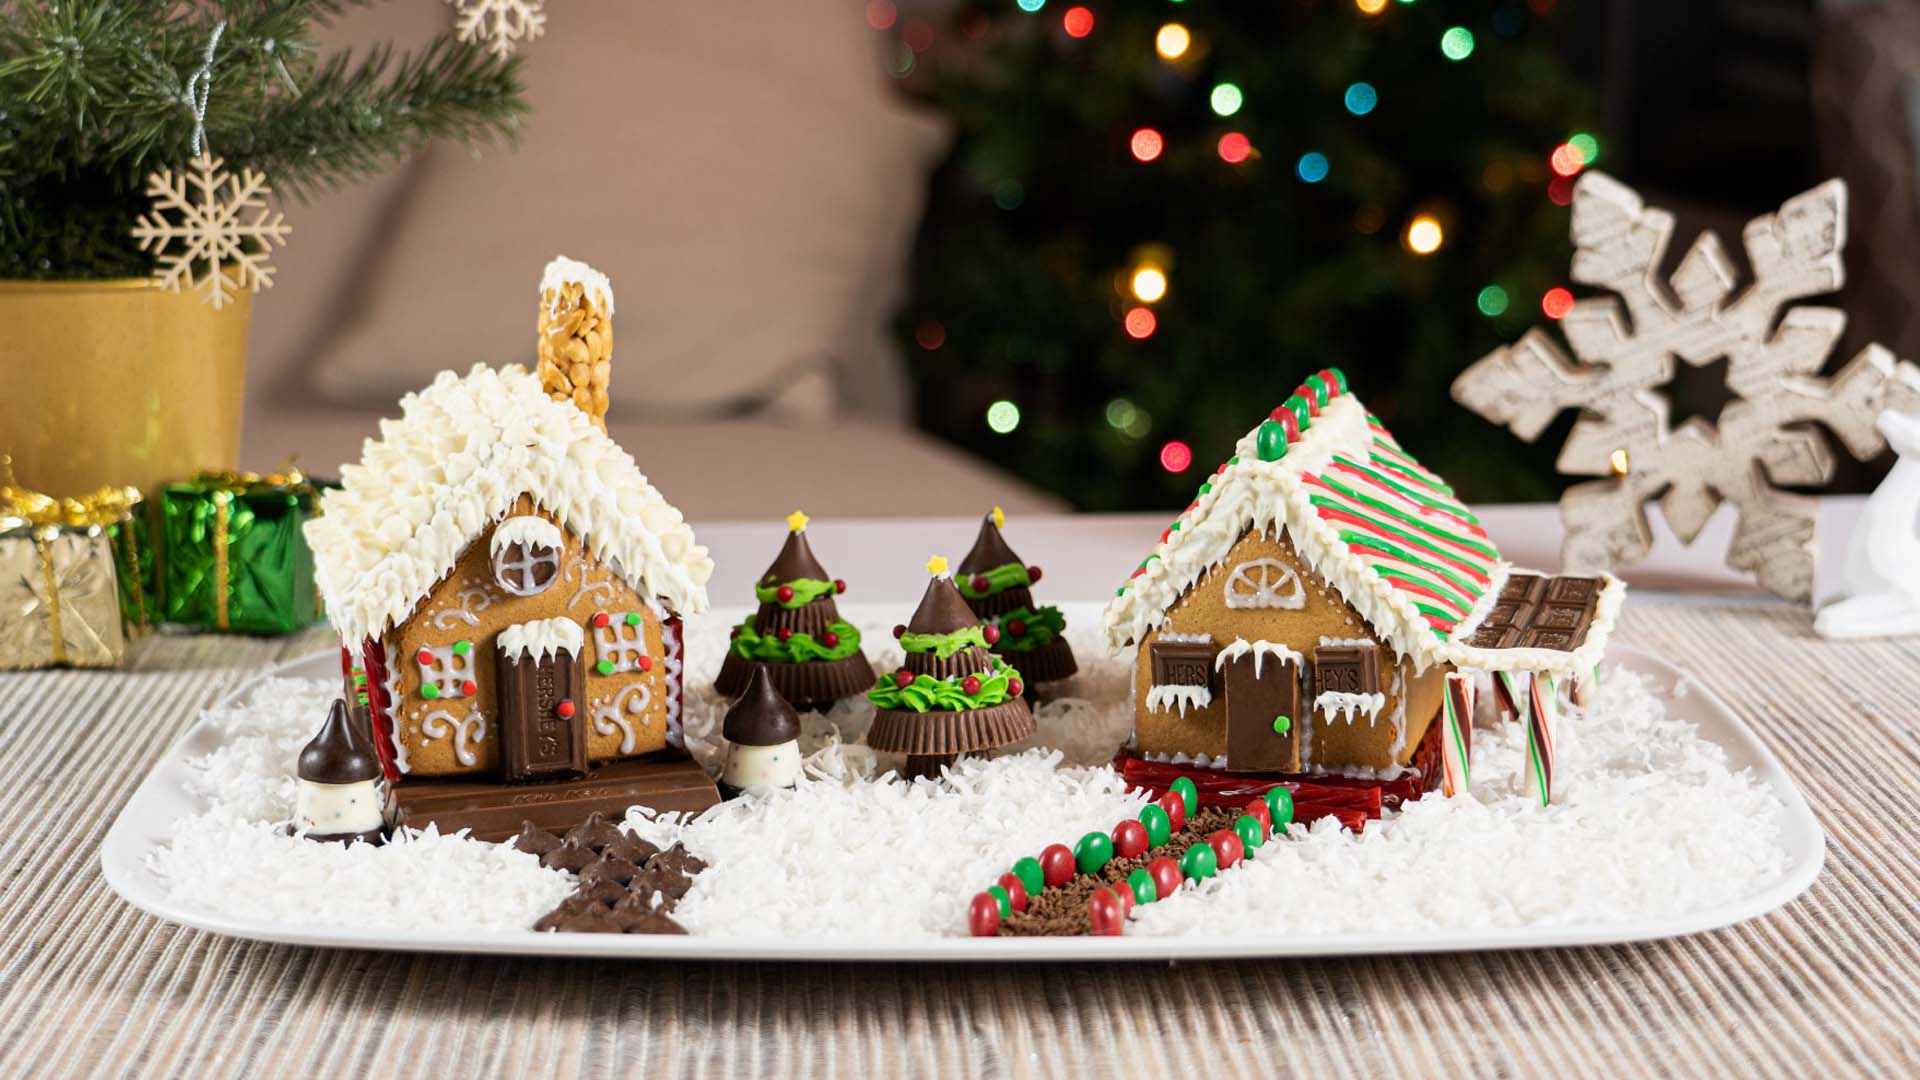 two fully decorated gingerbread houses